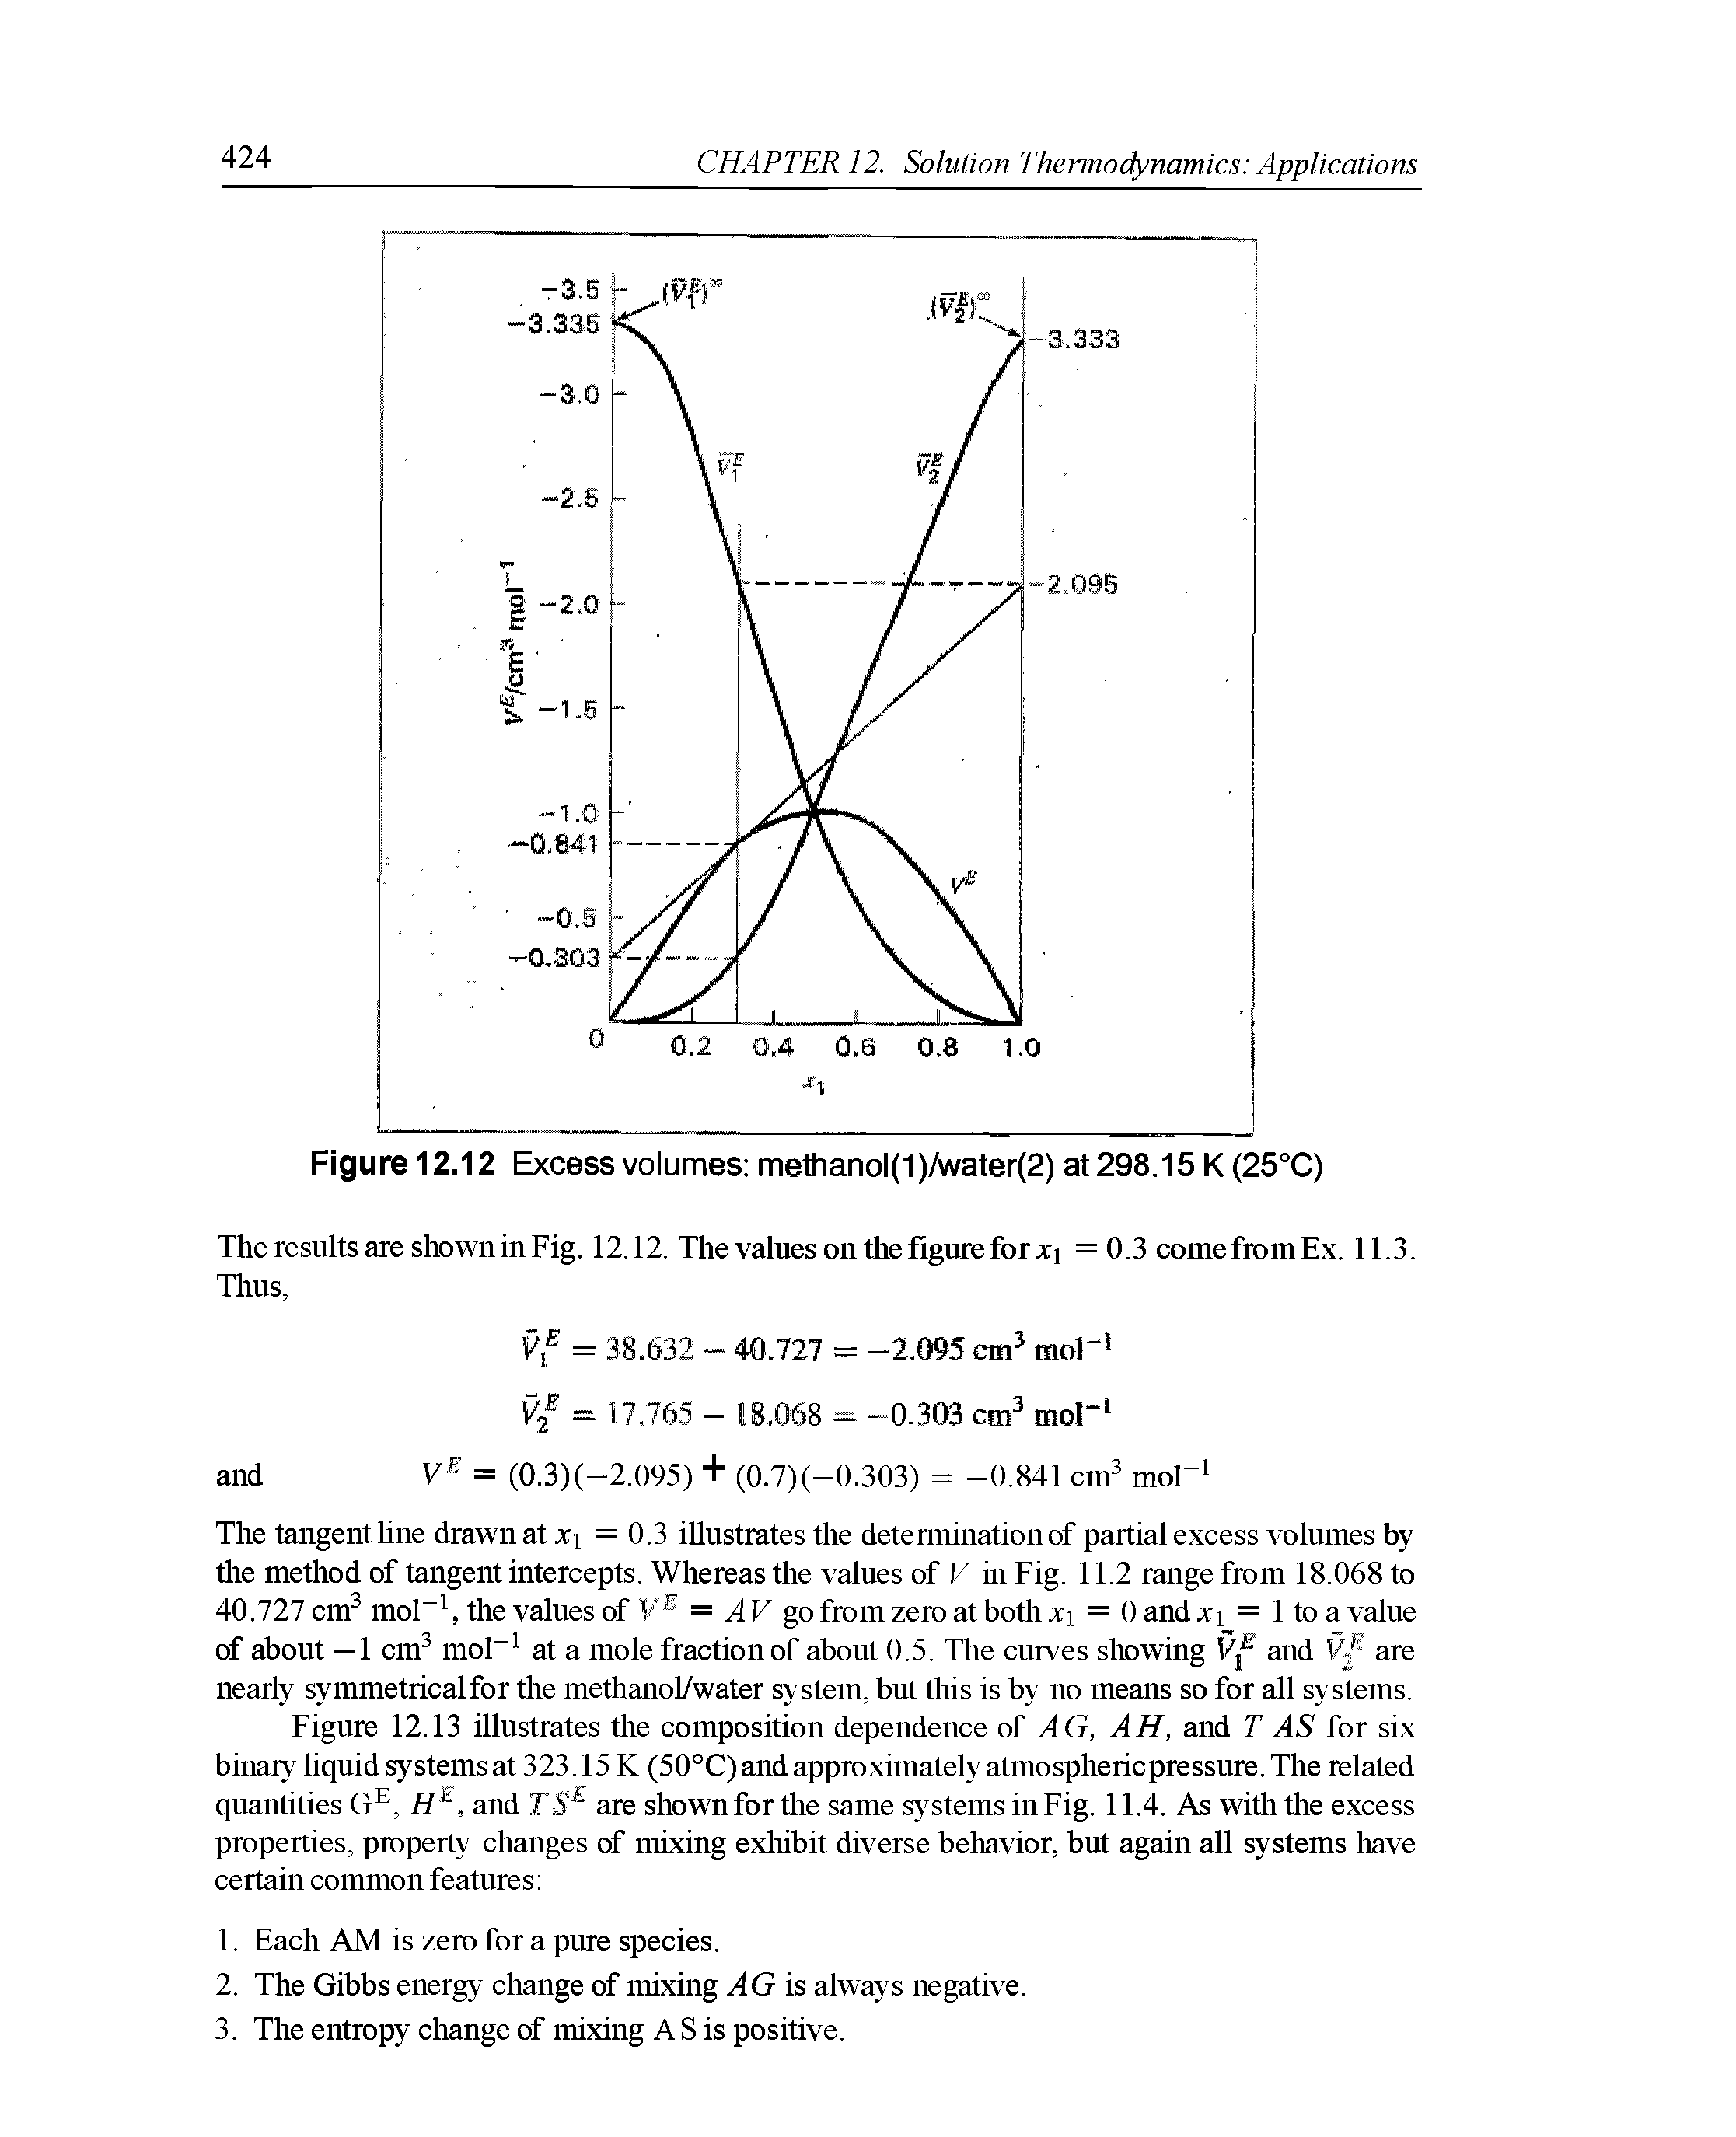 Figure 12.13 illustrates the composition dependence of AG, AH, and T AS for six binary liquid systems at 323.15 K (50°C) and approximately atmosphericpressure. The related quantities G , H , and FS are shownfortlie same systemsinFig. 11.4. As witlitlie excess properties, property changes of mixing exliibit diverse beliavior, but again all systems liave certain common features ...